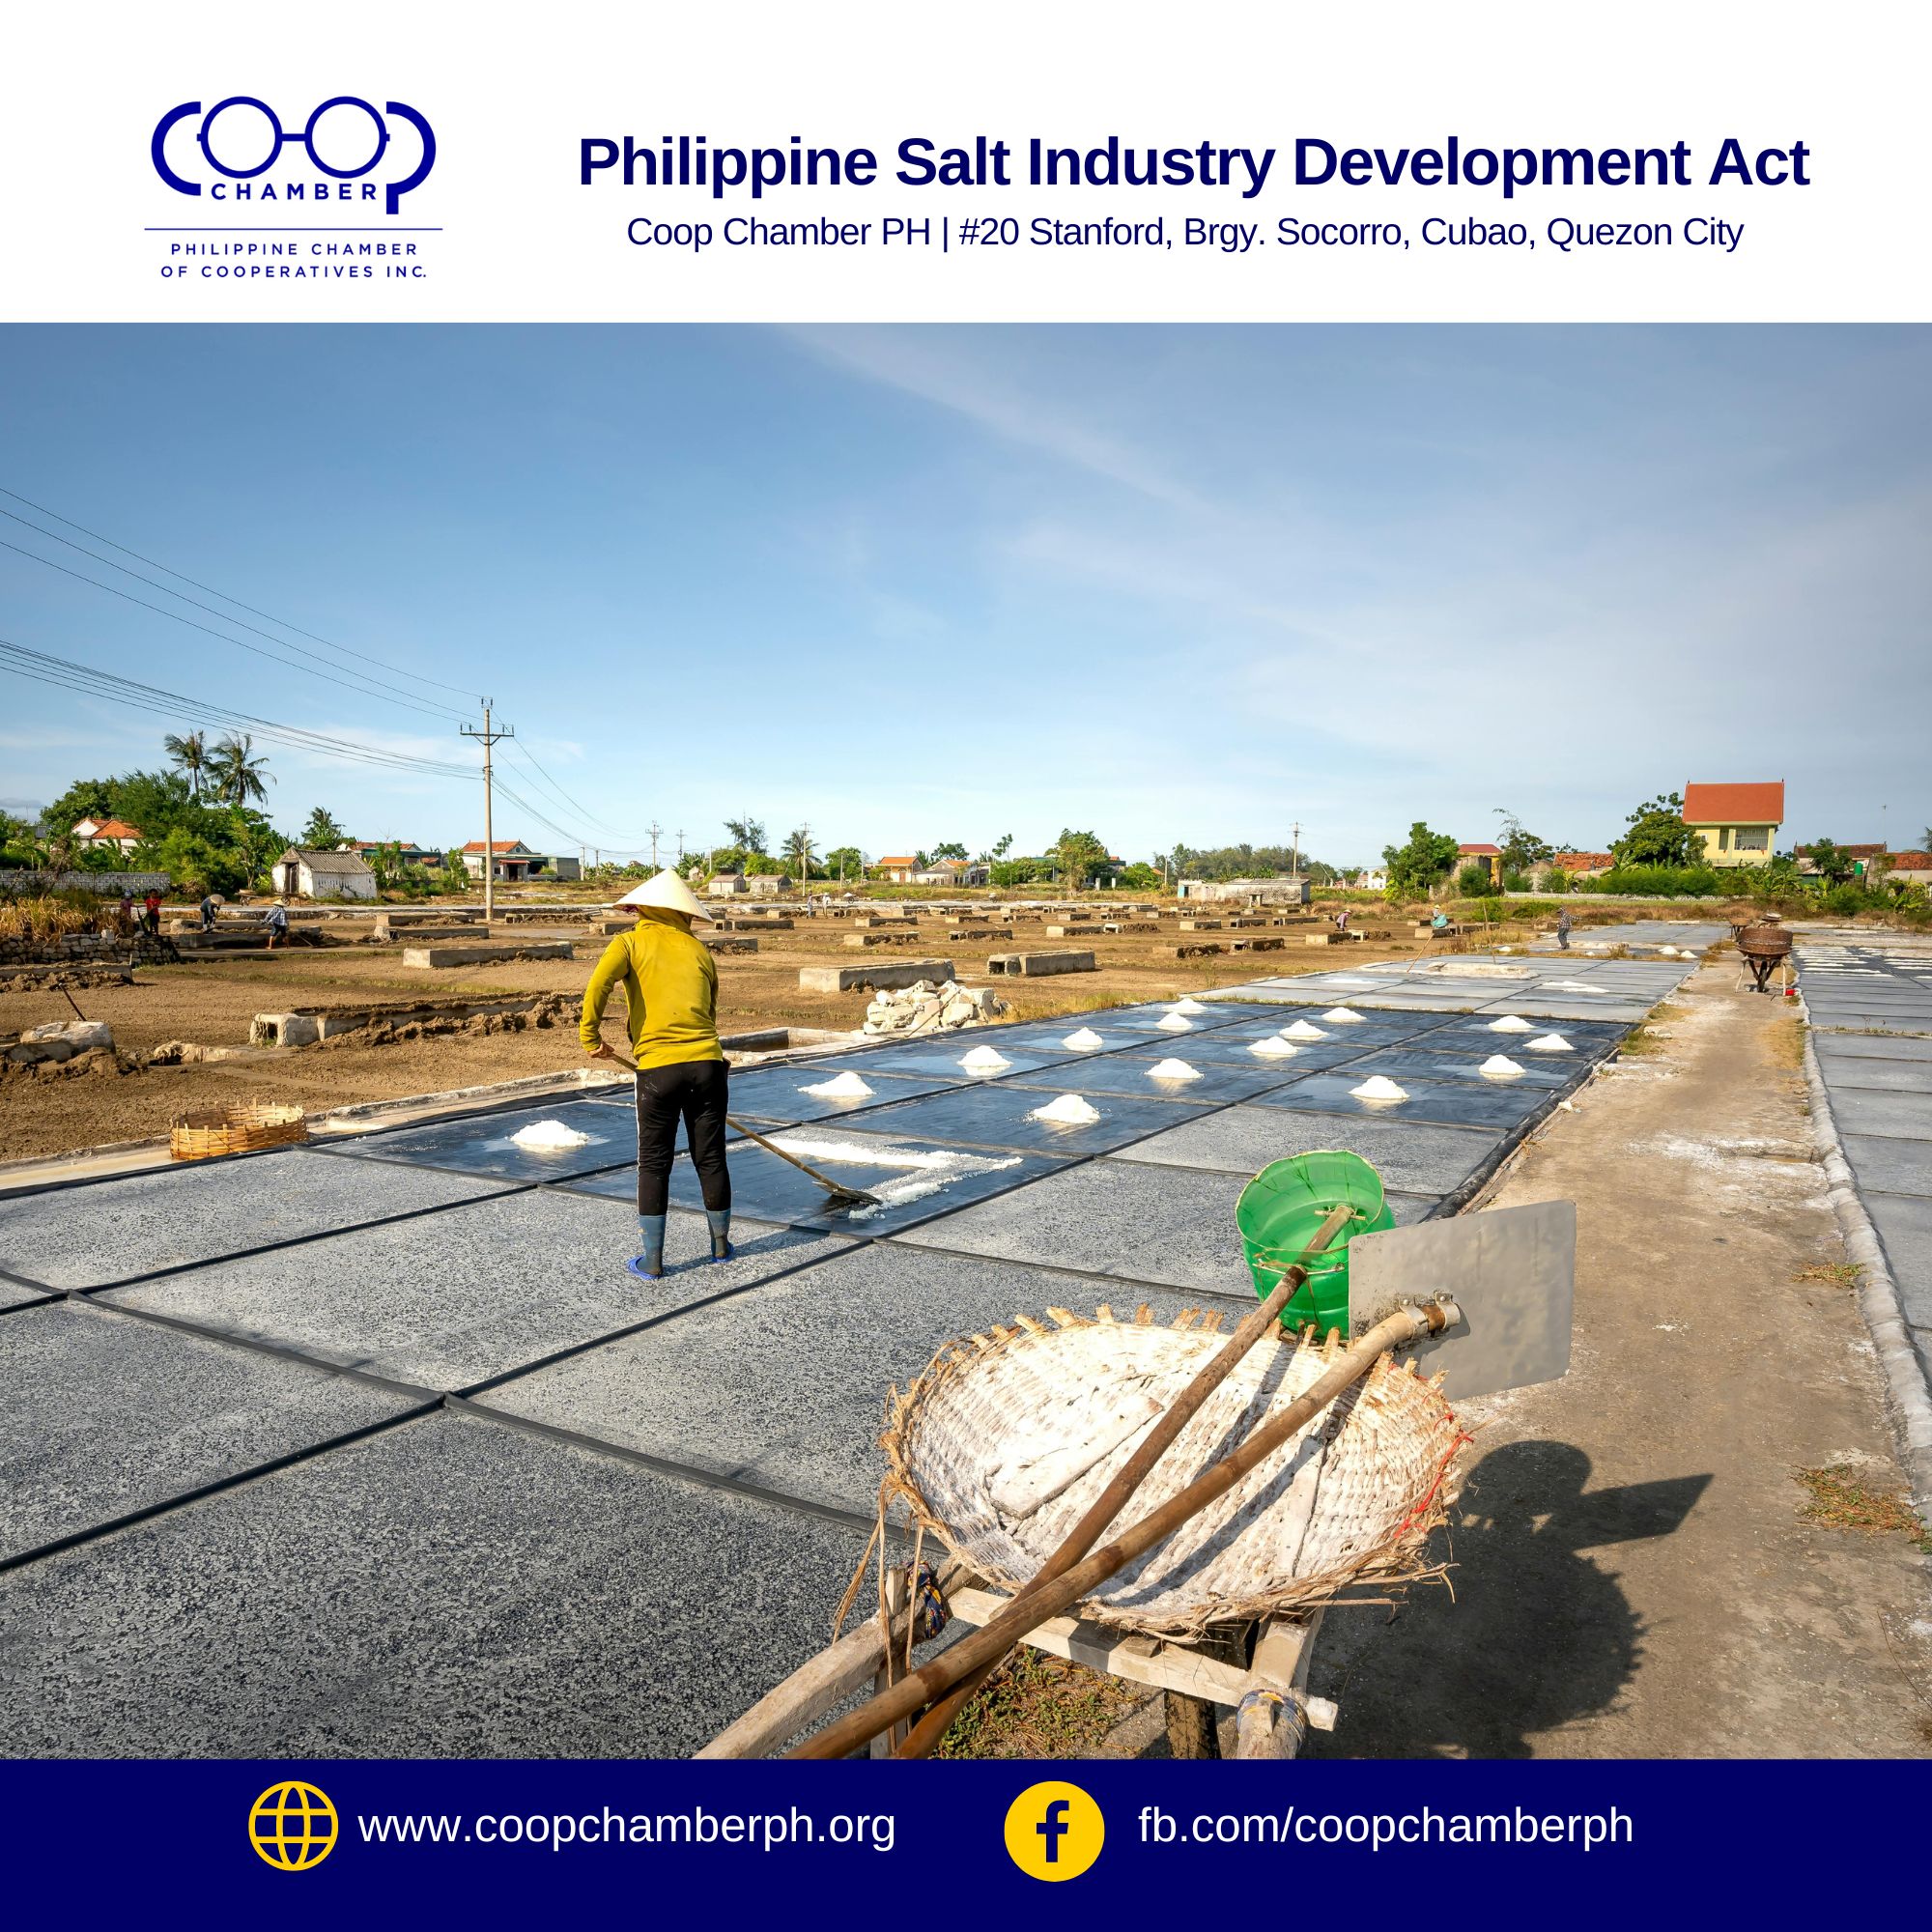 You are currently viewing The Coop Chamber supports and welcomes the passage of the Philippine Salt Industry Development Act and the Inclusion of Cooperatives’ Representation in the council